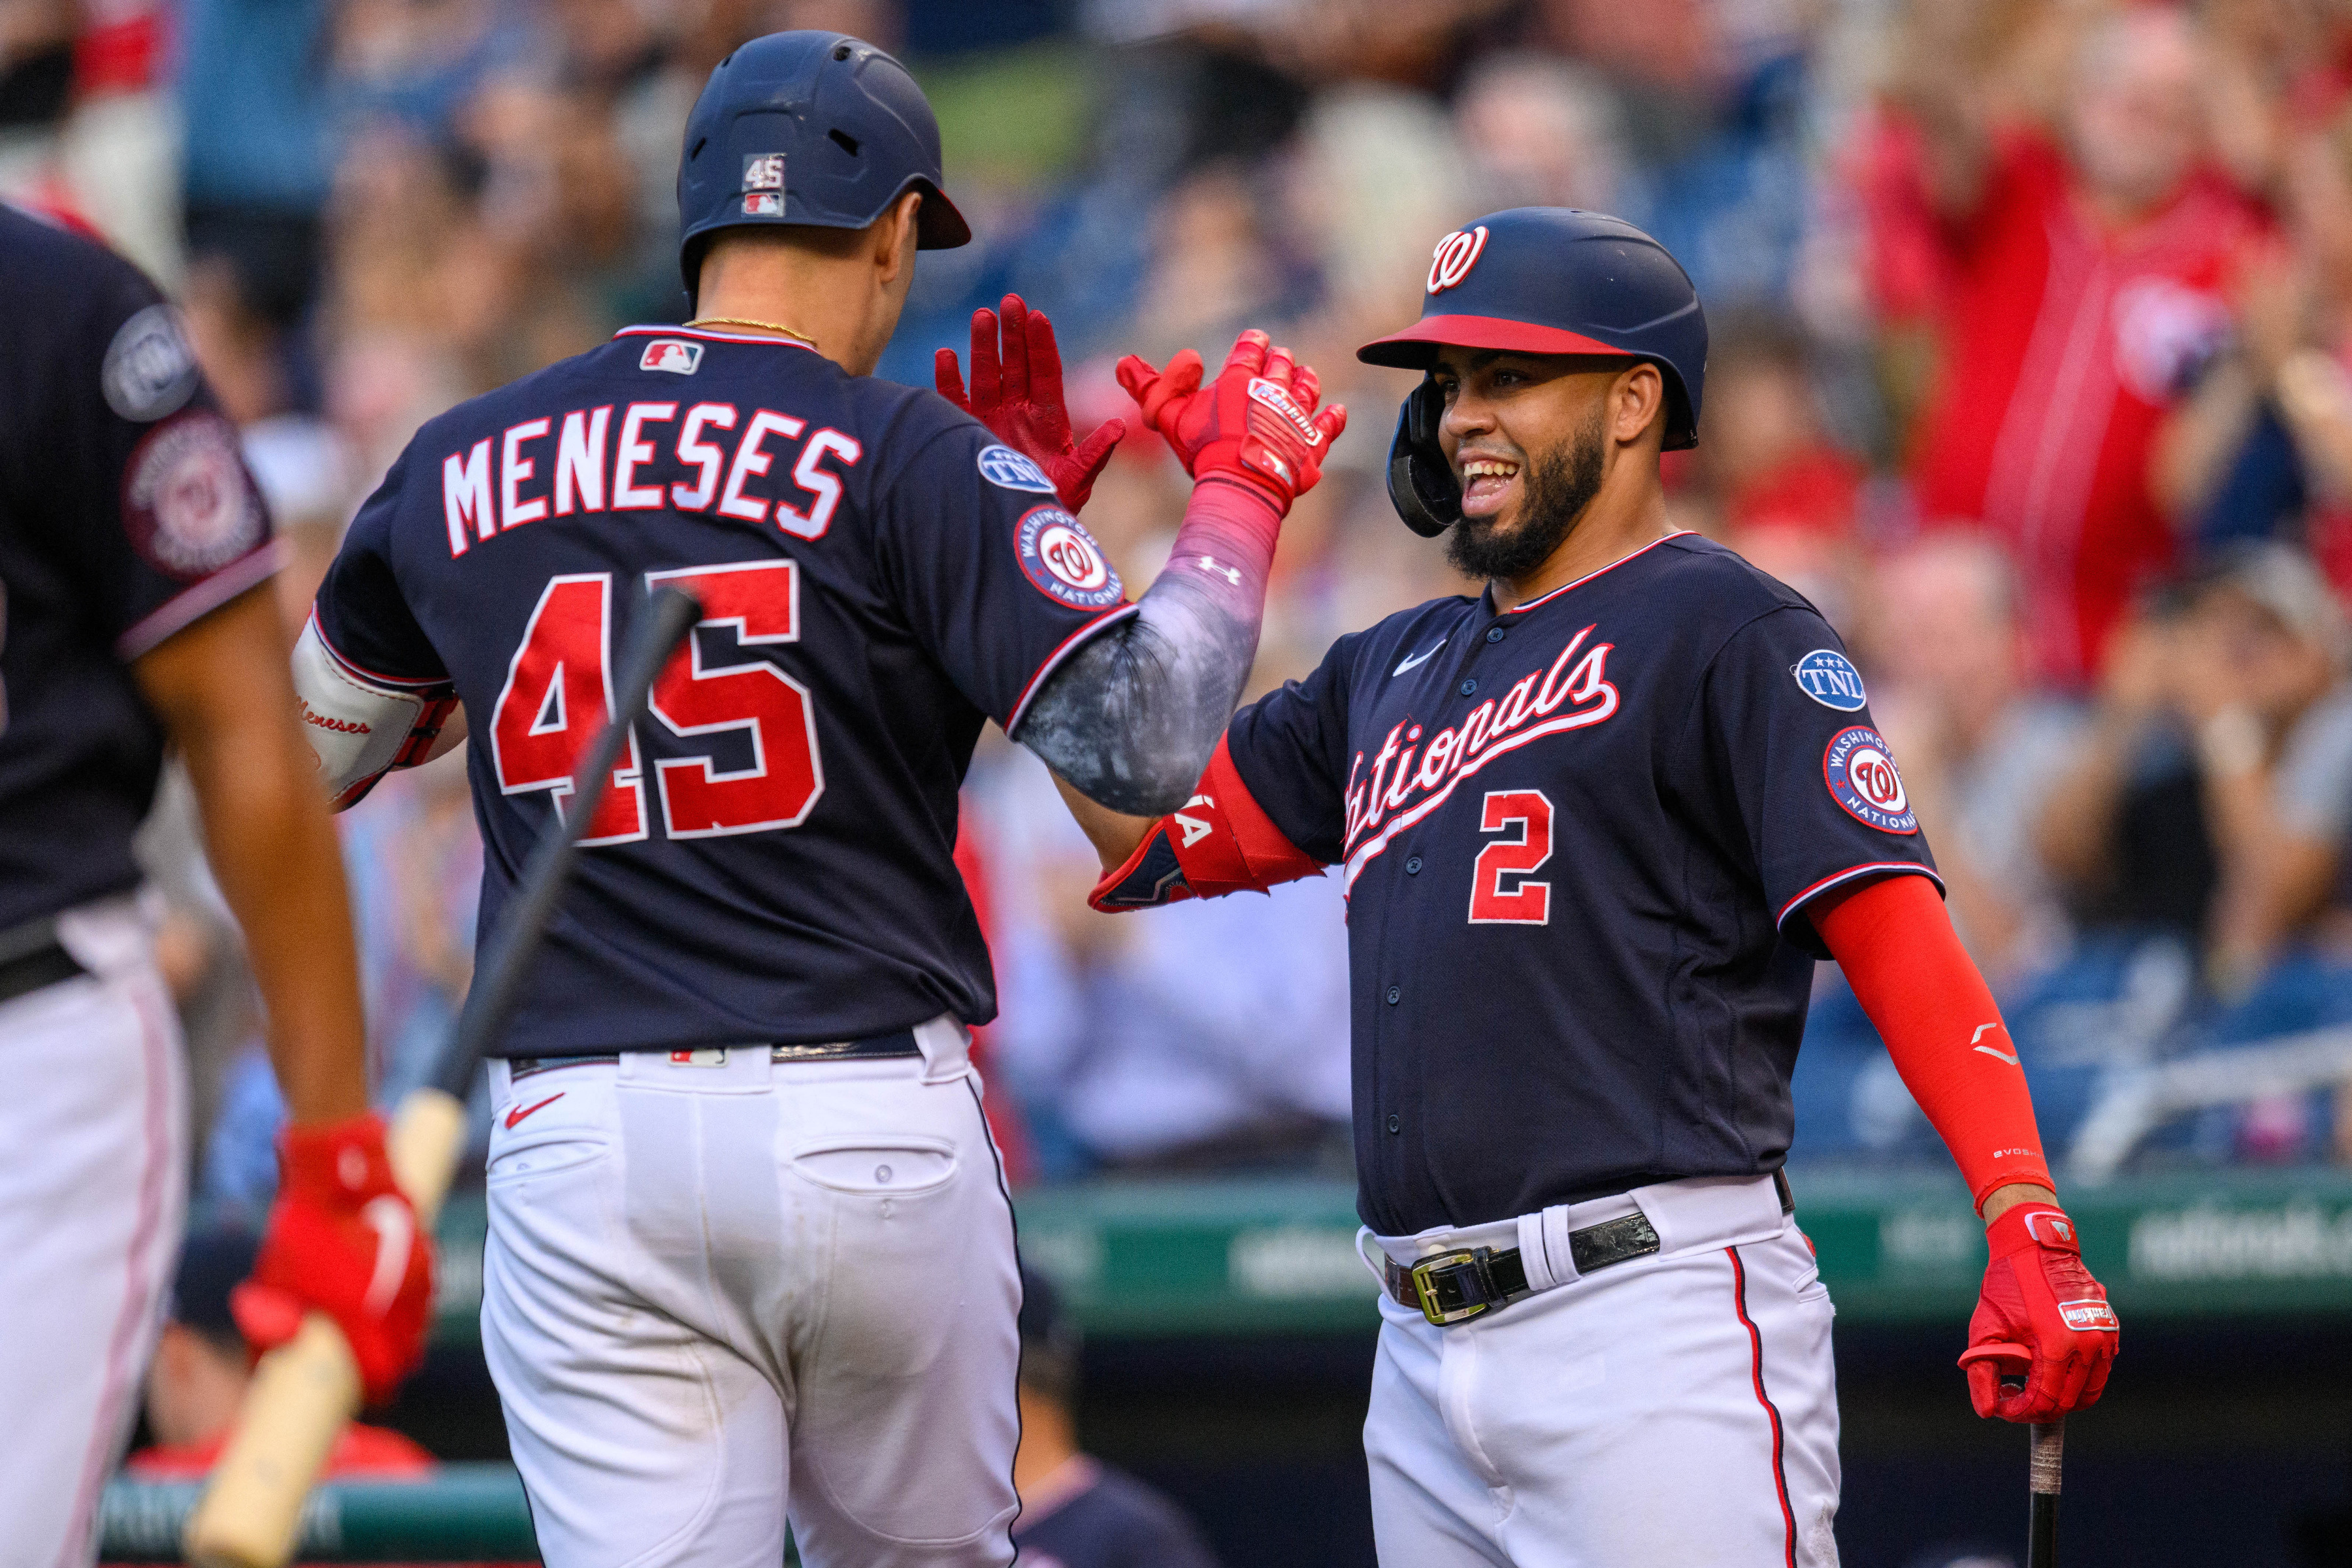 Joey Meneses homers, drives in 3 runs as the Nationals rally past the  Brewers 5-3 - The San Diego Union-Tribune